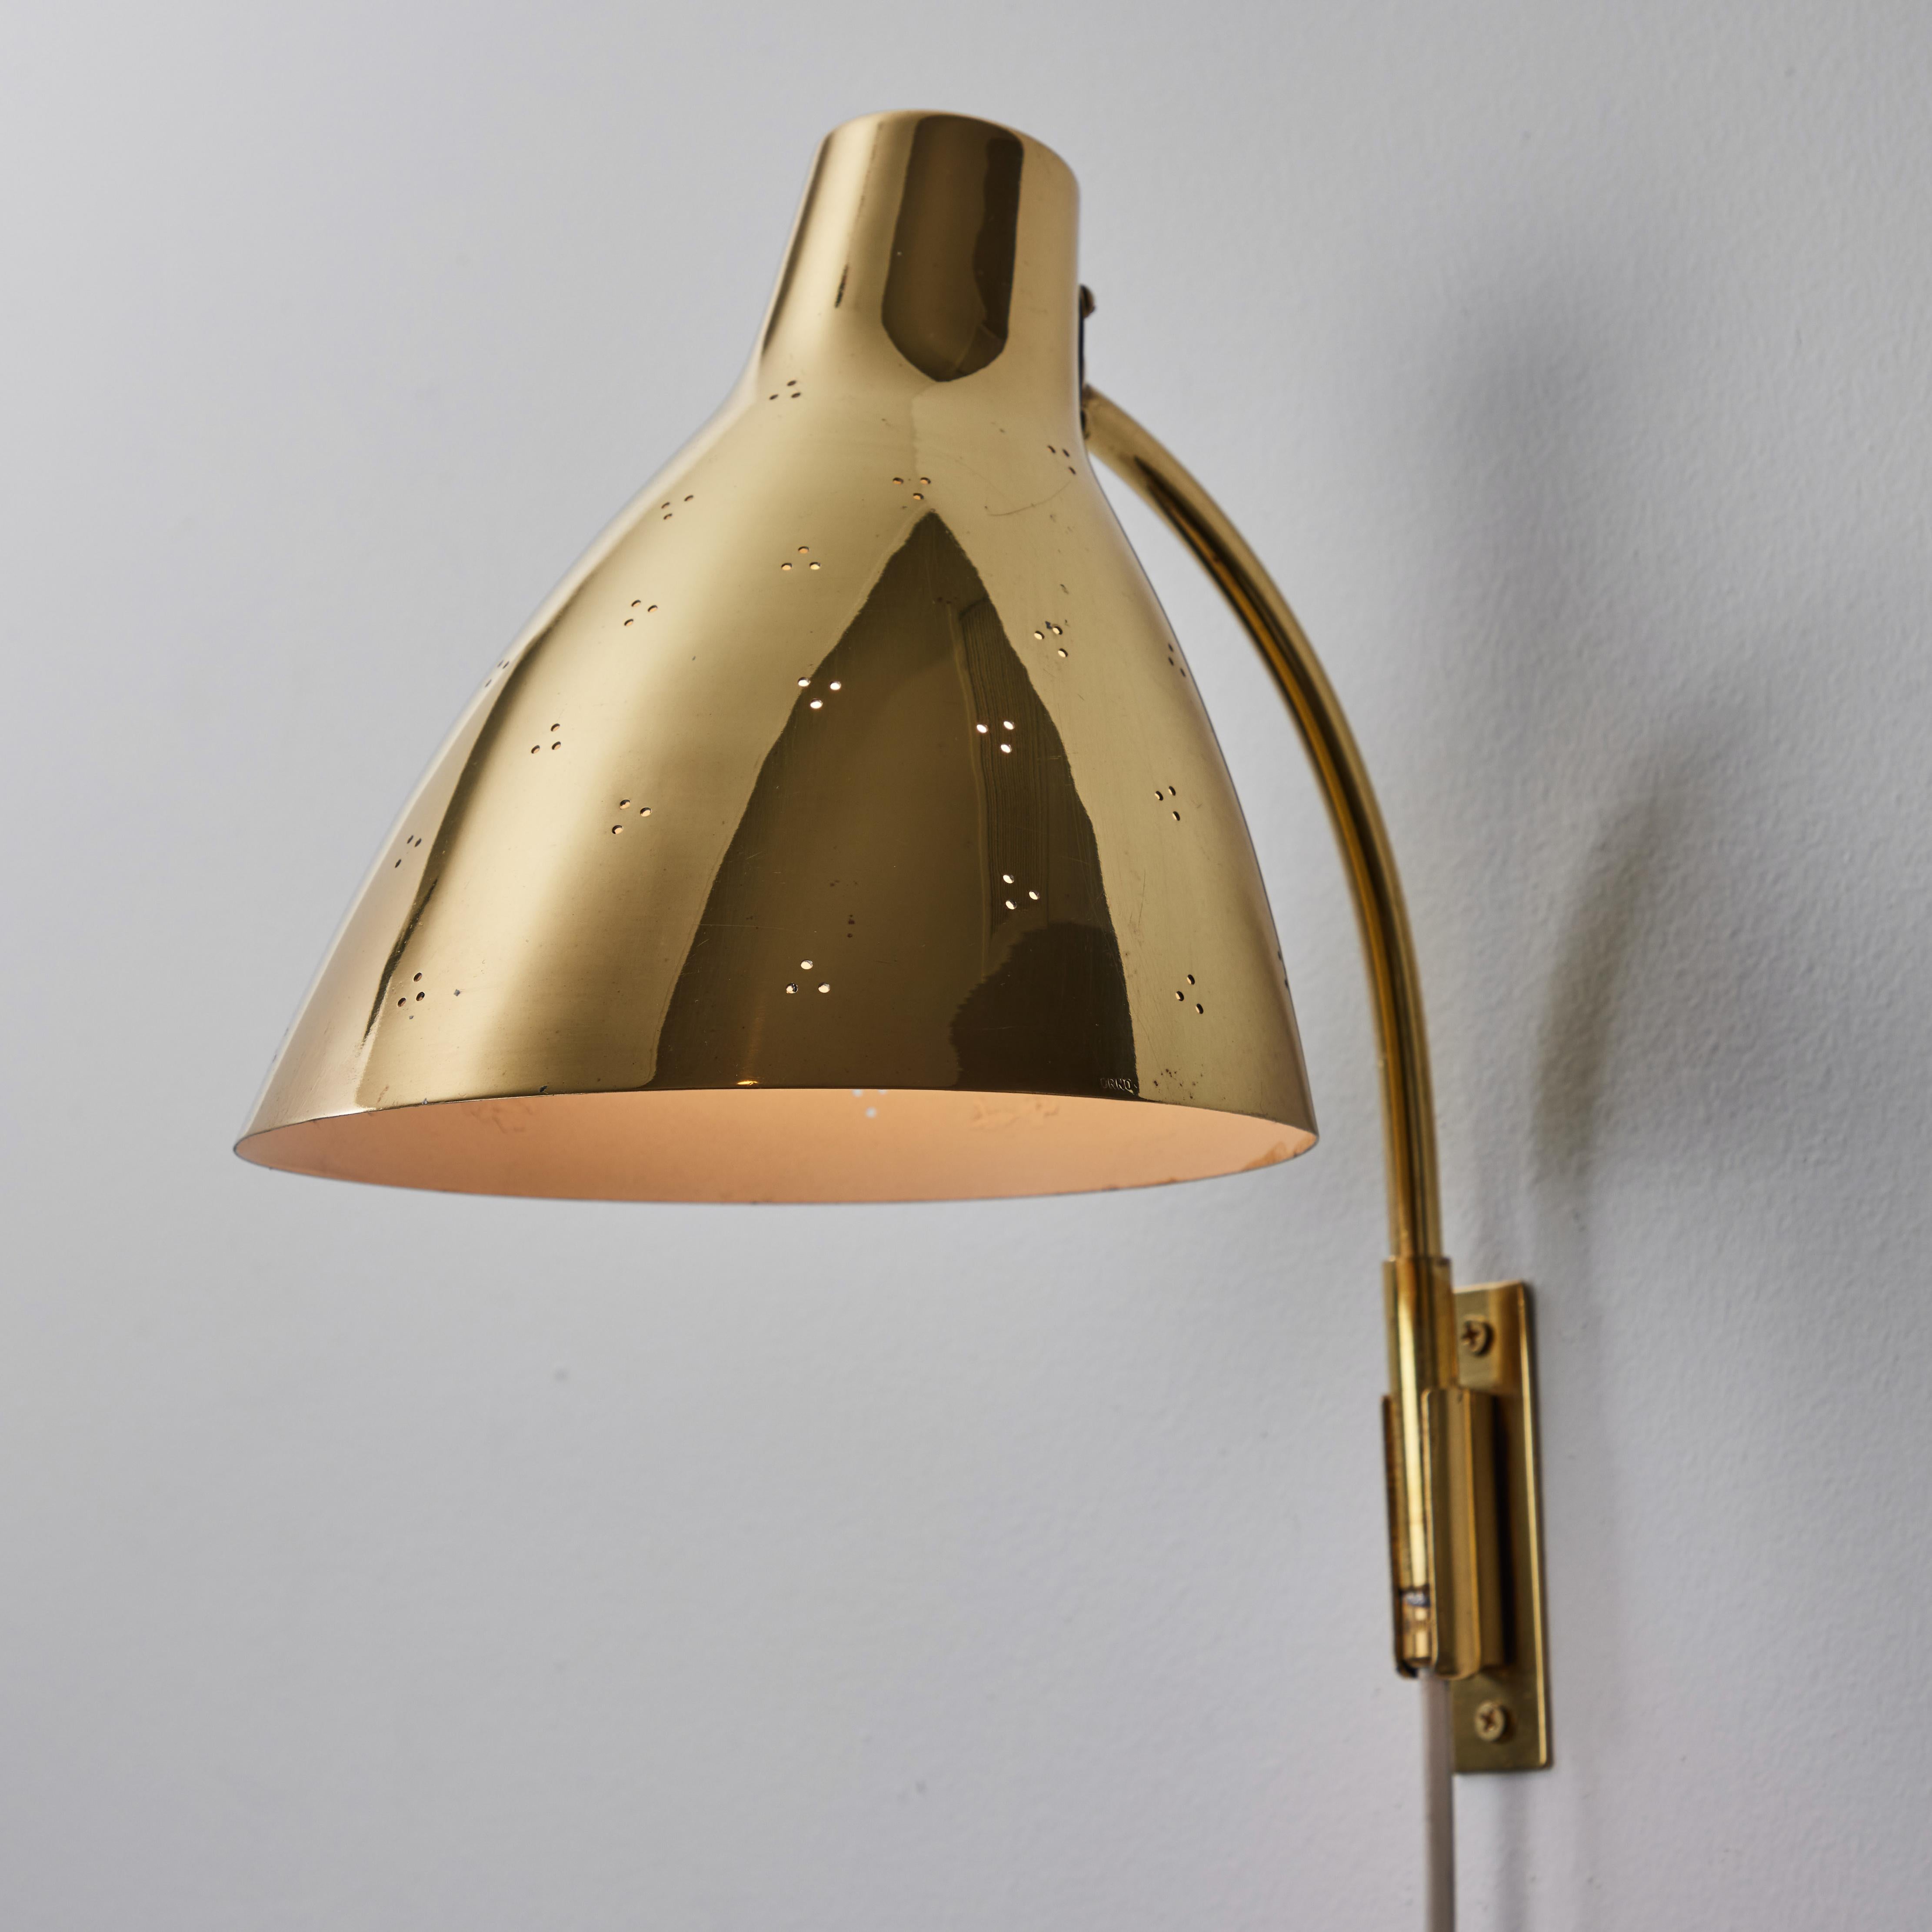 Pair of Large 1950s Lisa Johansson Pape #3055 Brass Wall Lamps for Stockmann. A highly sculptural pair of wall lamps executed in perforated brass.

Price is for the pair. 

A contemporary of Paavo Tynell, the refined work of Lisa Johansson-Pape has